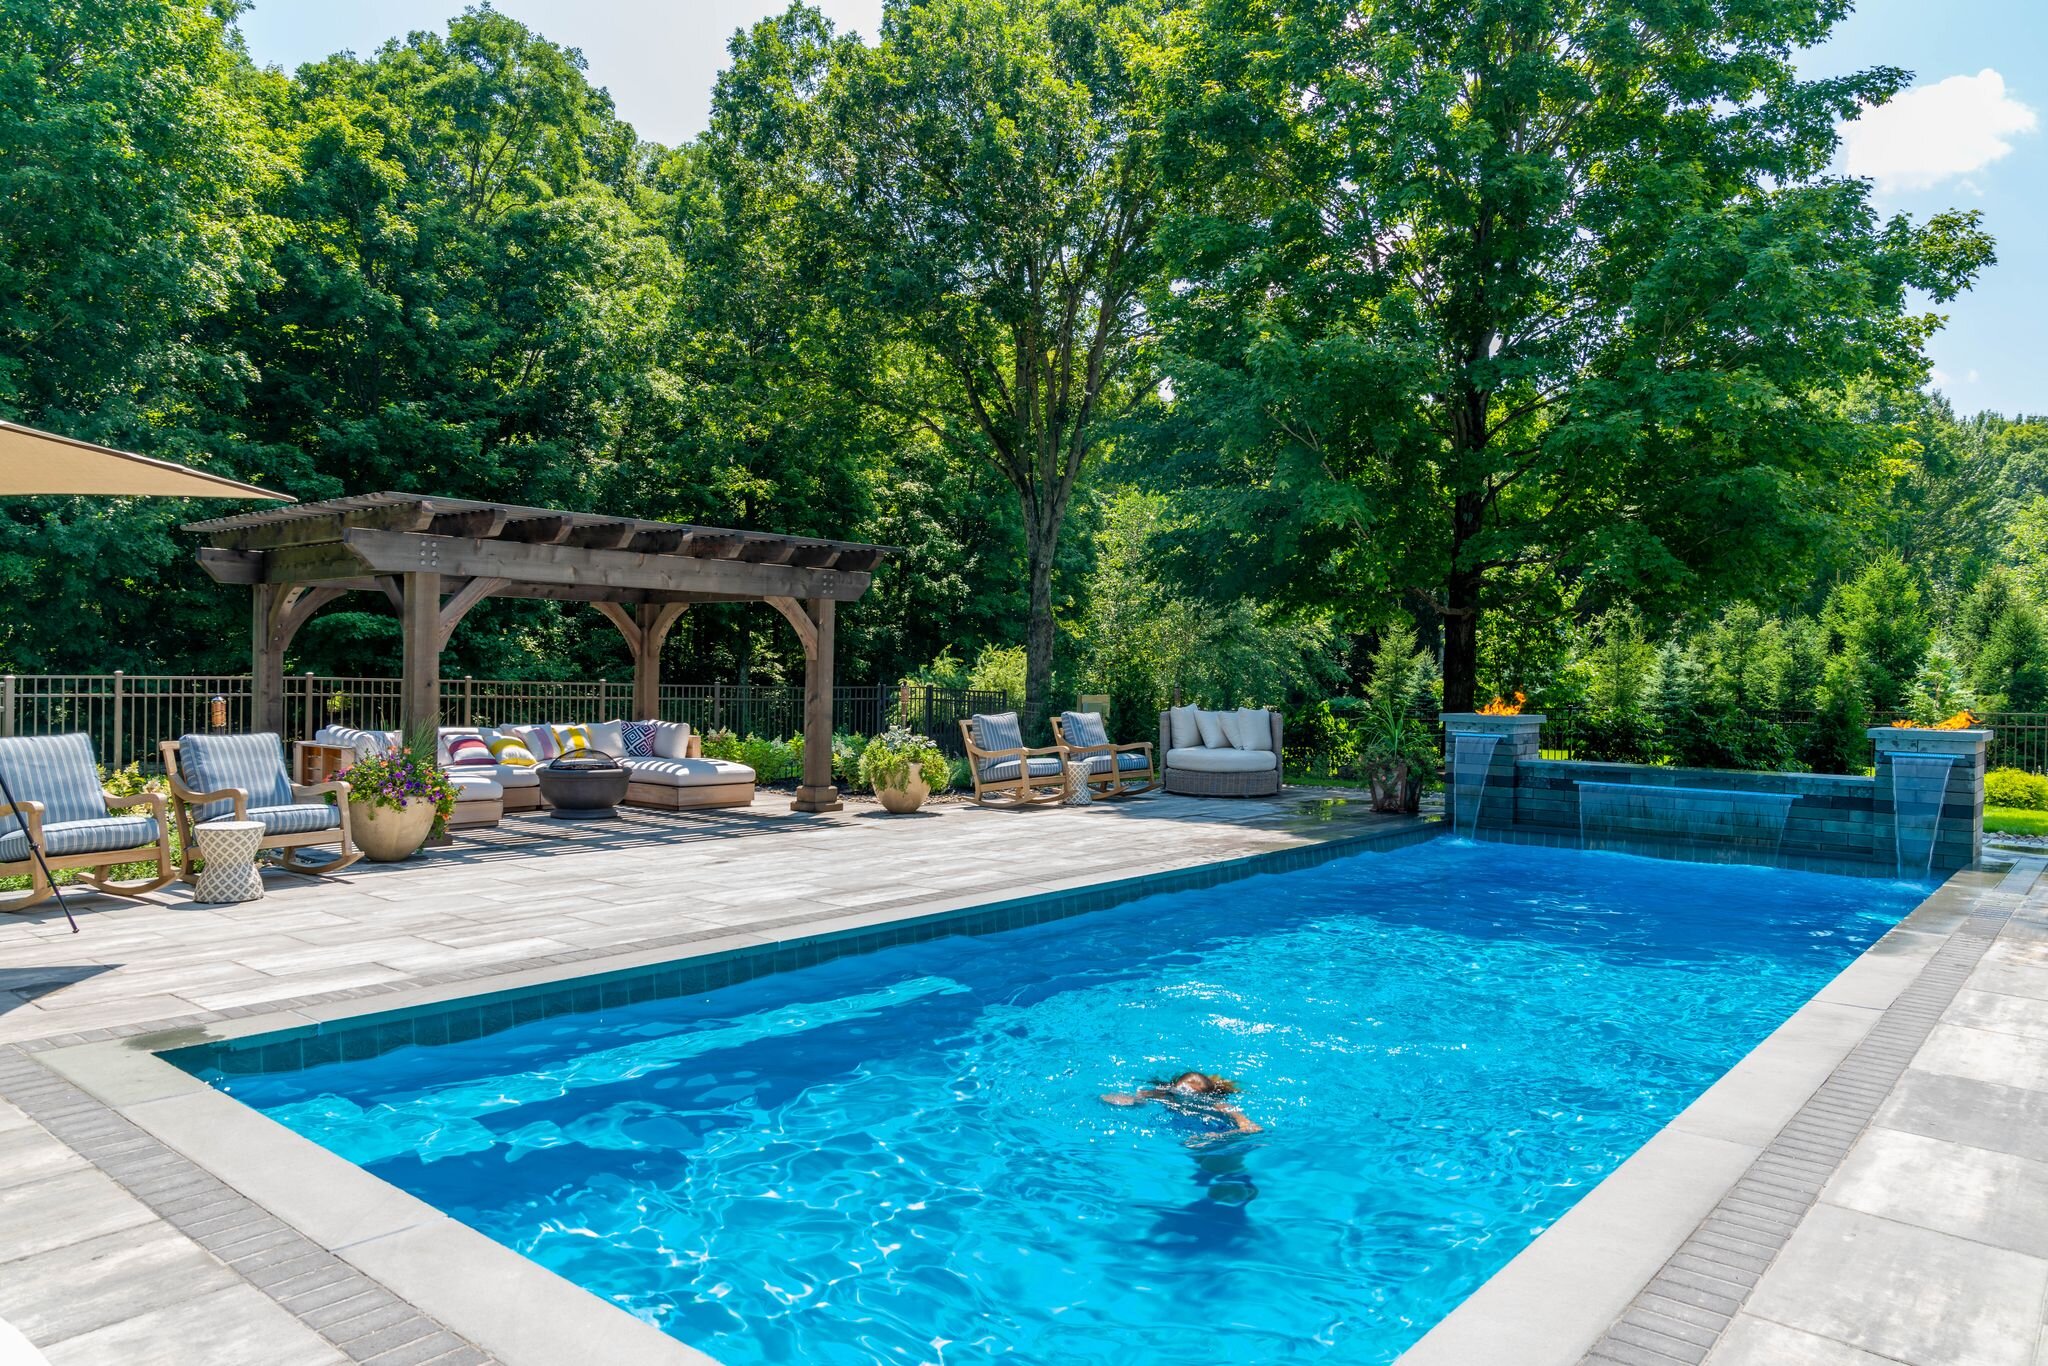 Pool Design Ideas: 22 AD-Approved Options